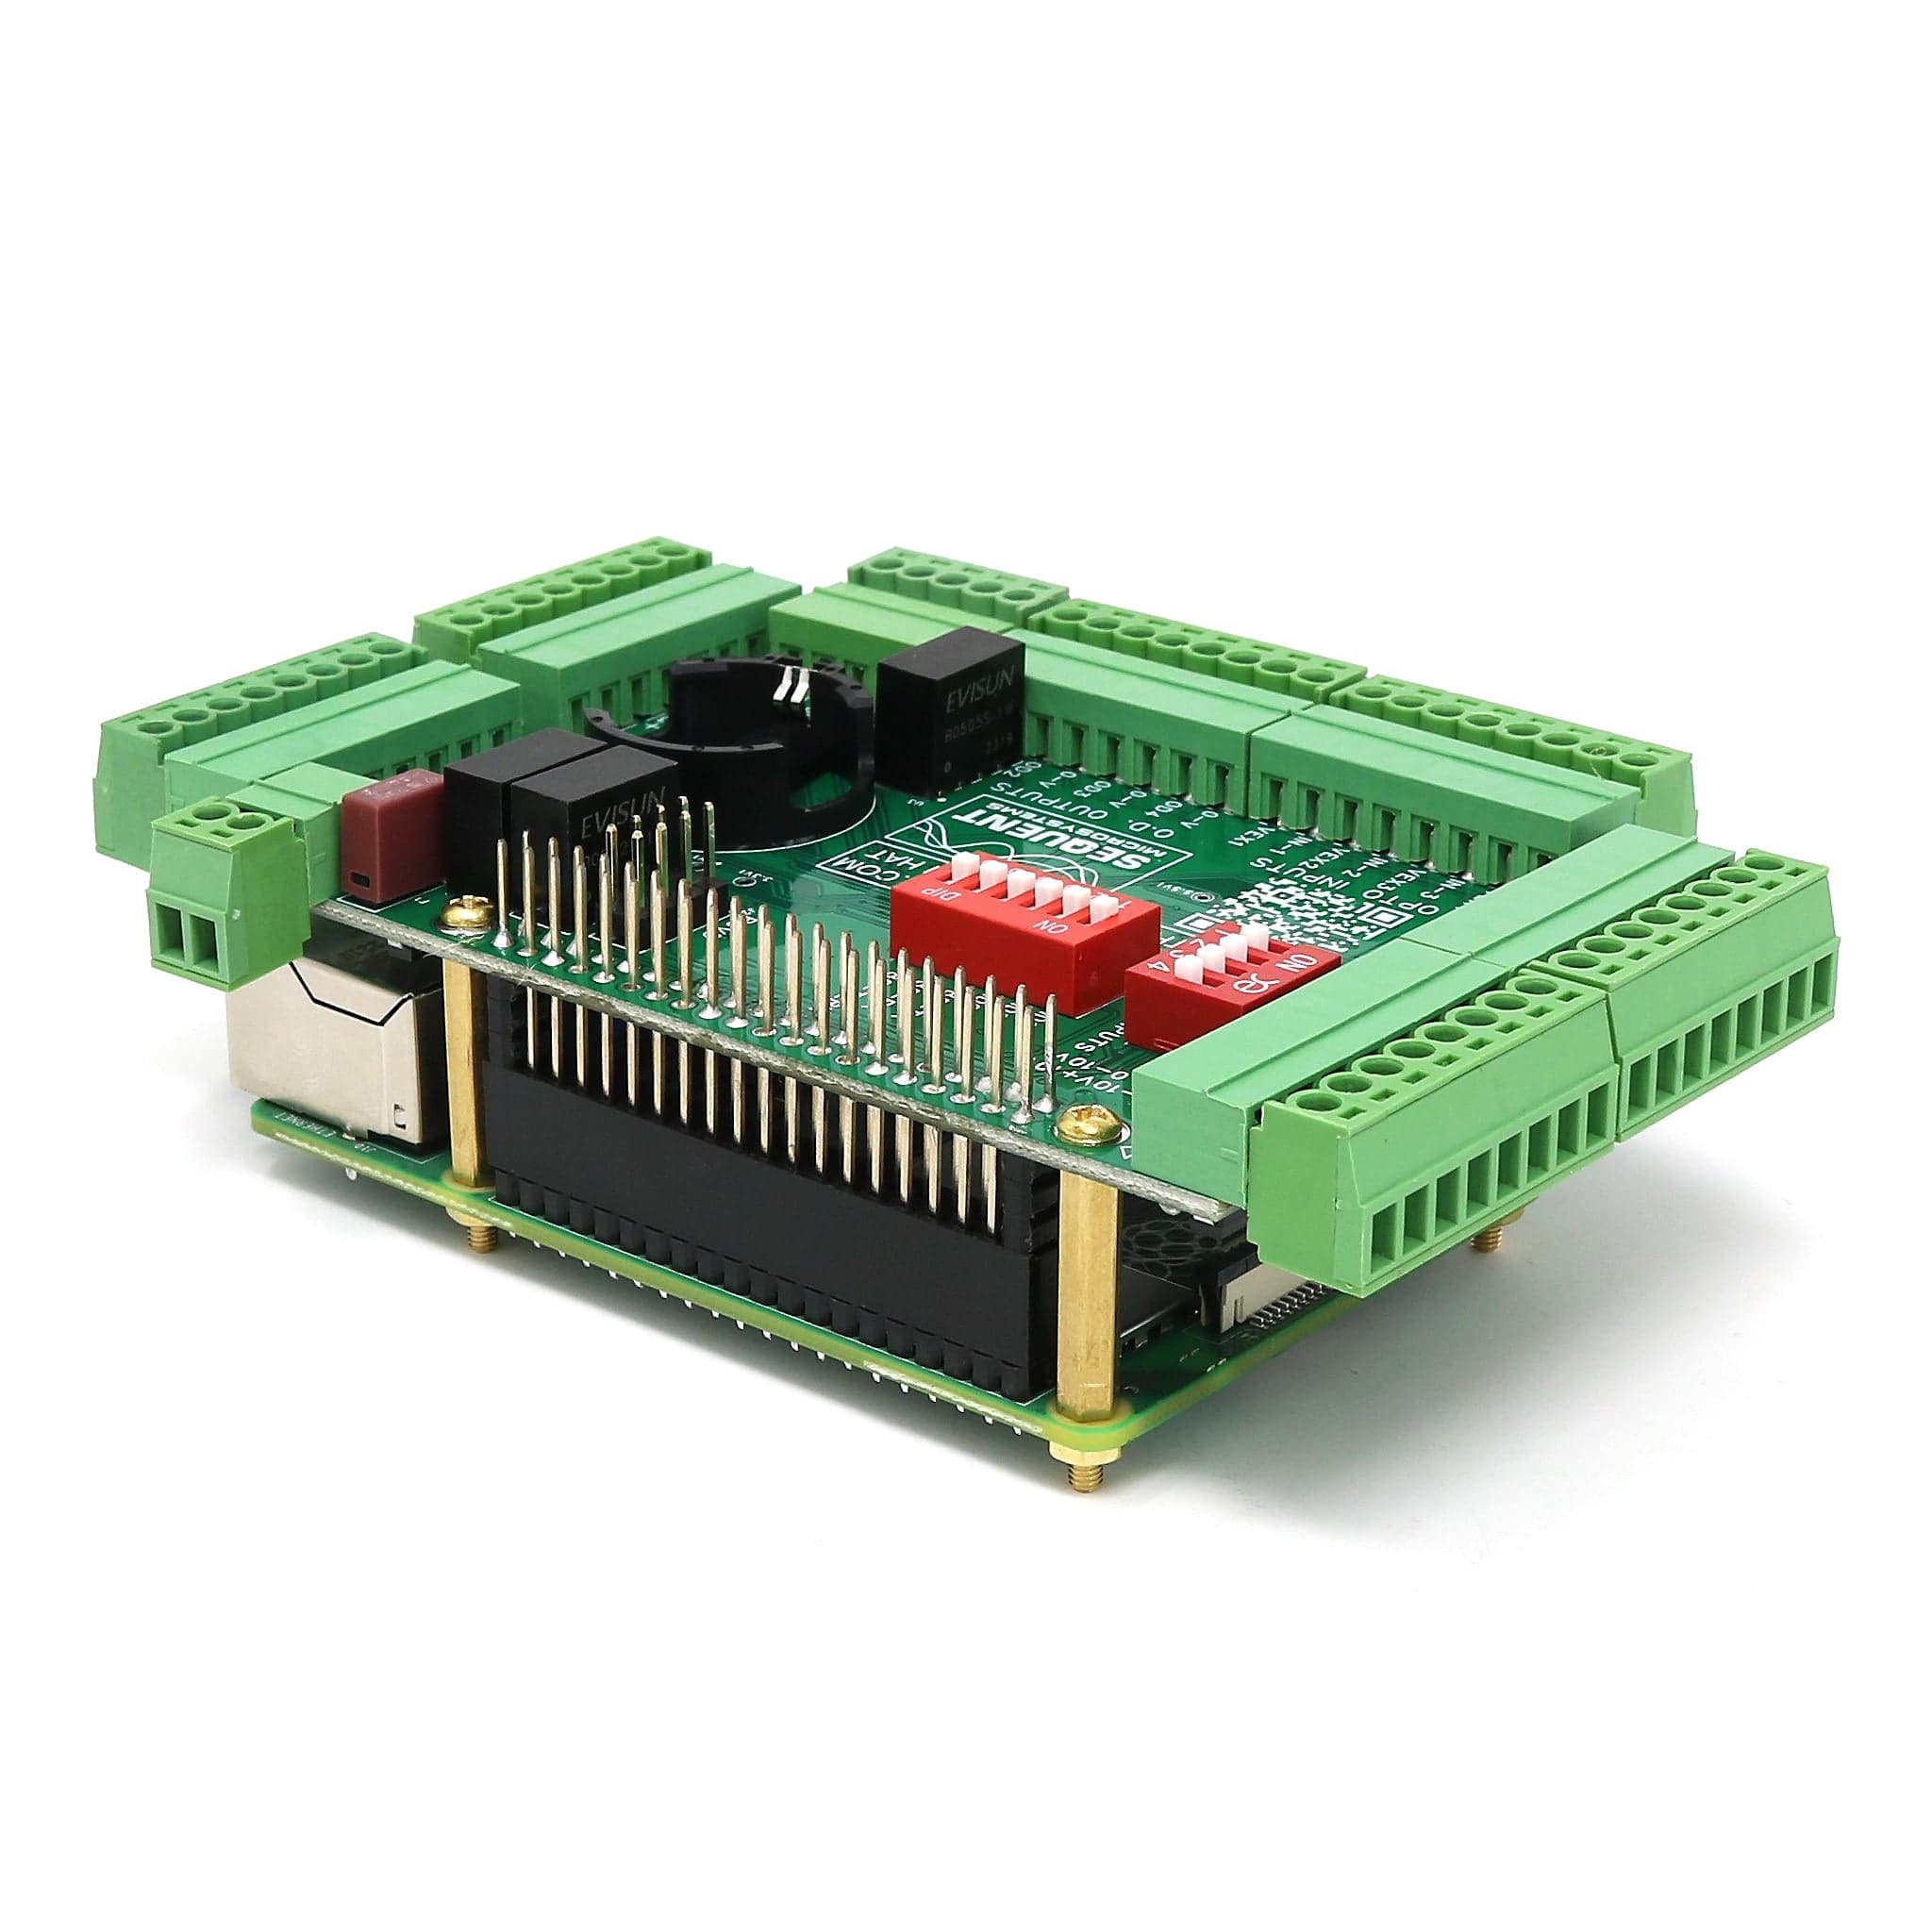 Industrial Automation Stackable Card for Raspberry Pi - The Pi Hut